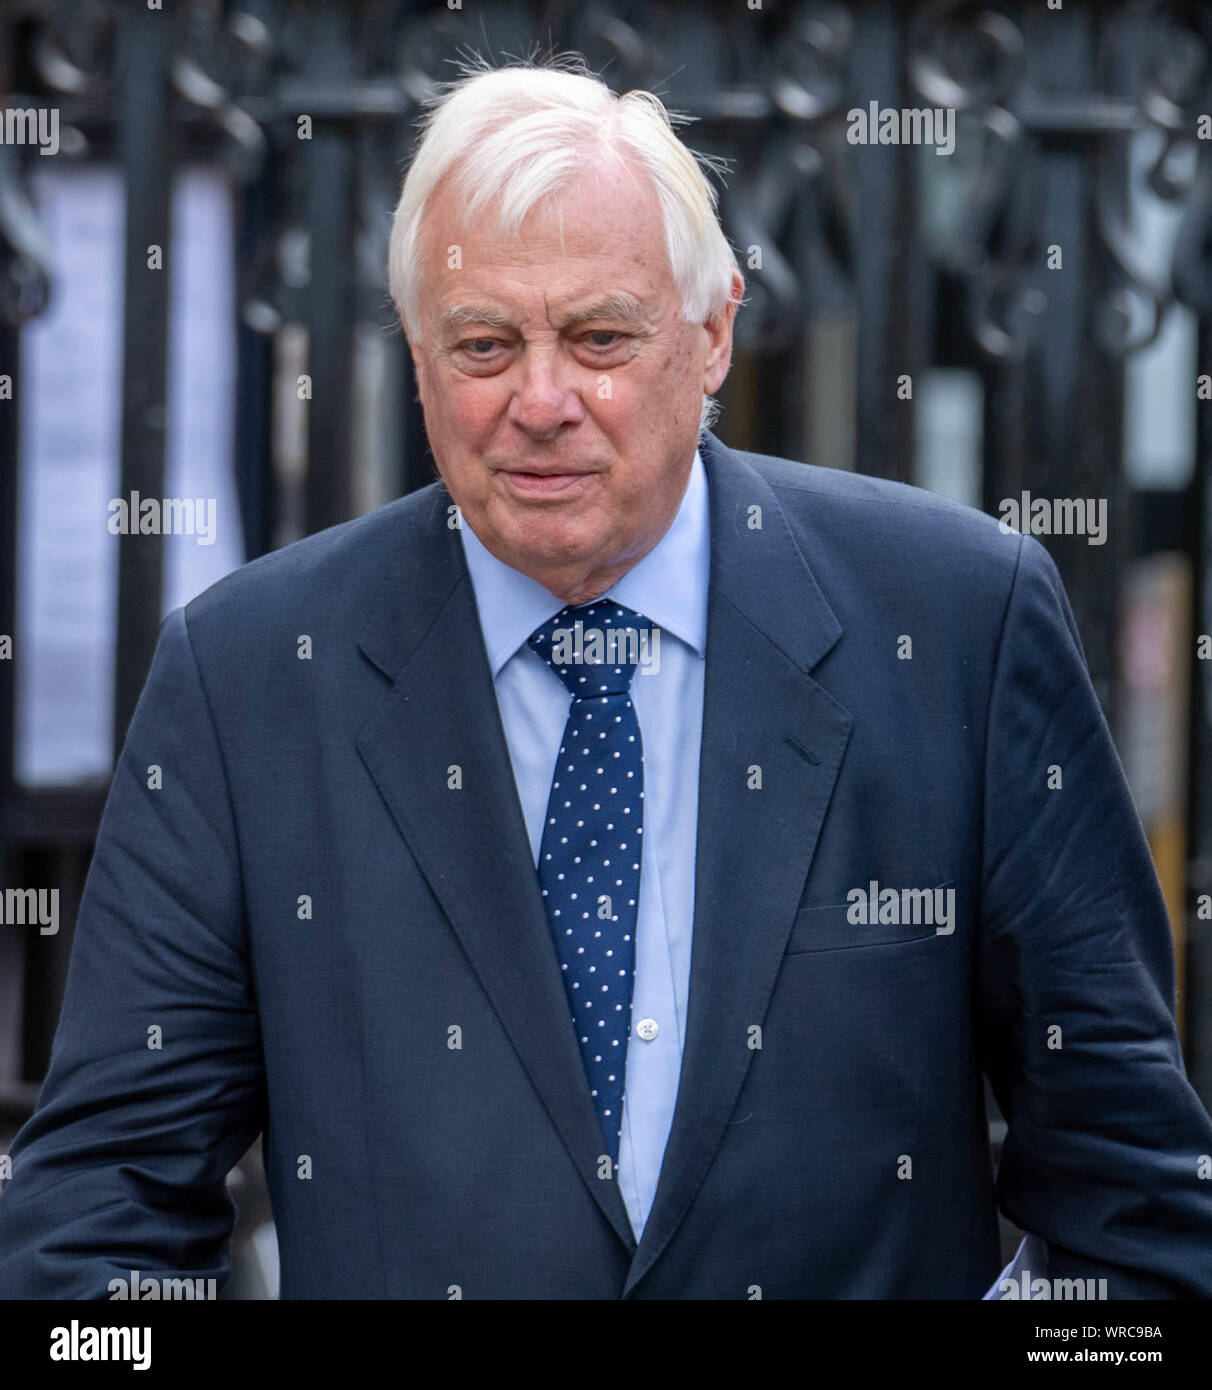 London UK 10th September 2019 Lord Chris Patten (former Governor of Hong Kong)  at Westminster Abbey for the memorial service for Paddy Ashdown Credit Ian DavidsonAlamy Live News Stock Photo